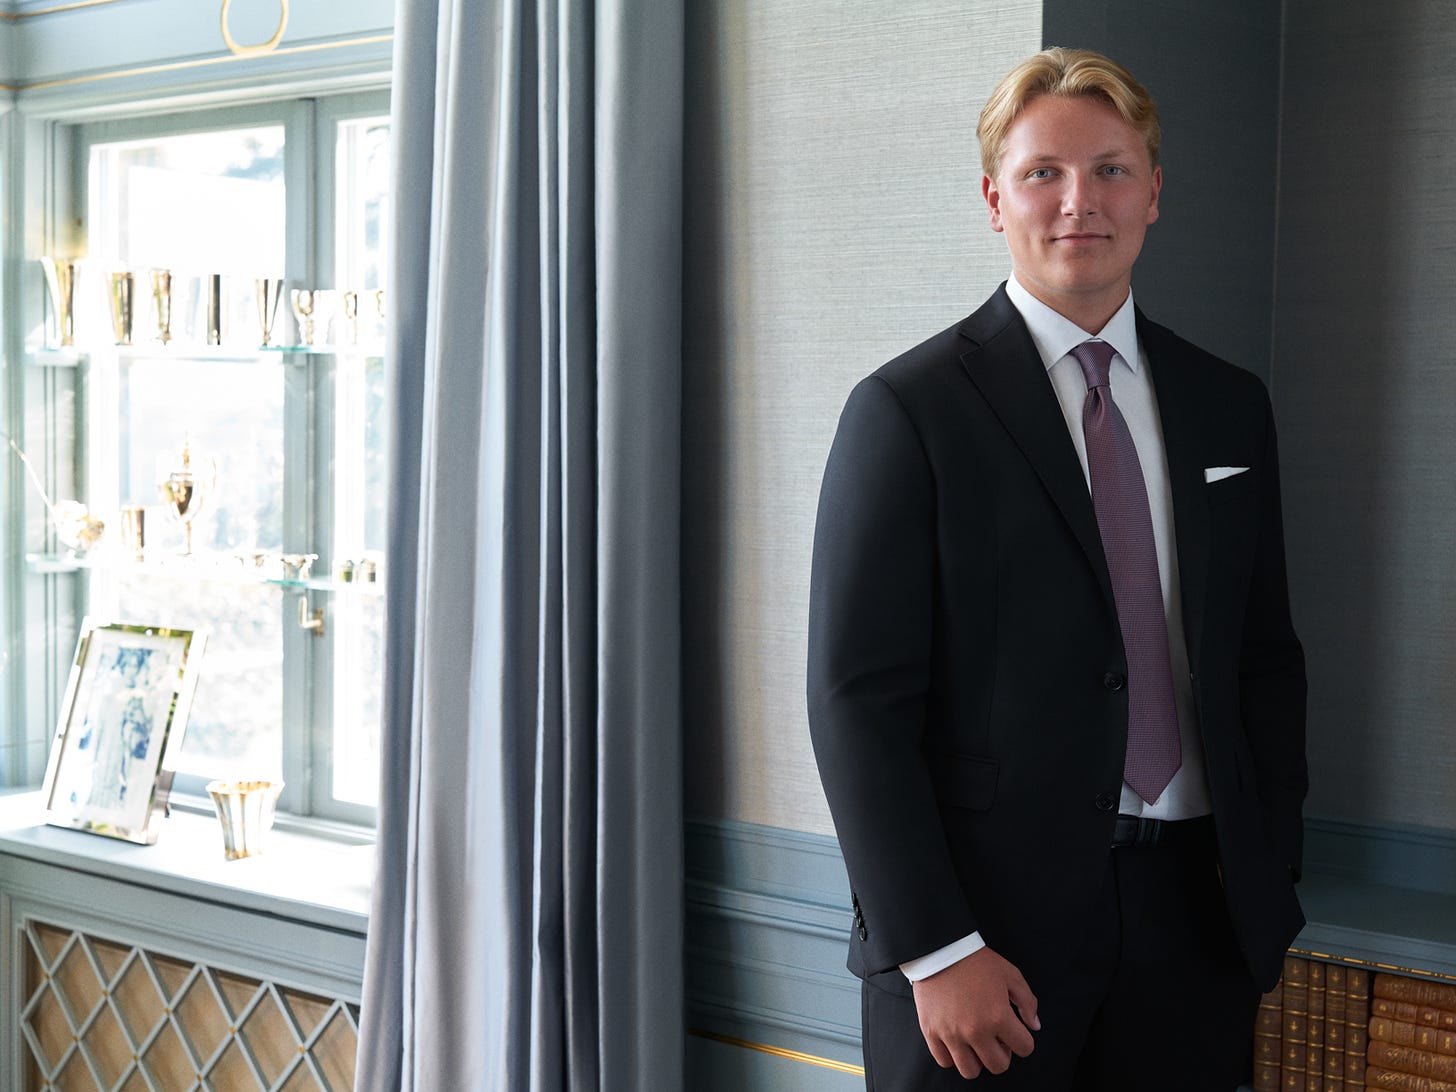 prince sverre of norway in a suit posing for a photo